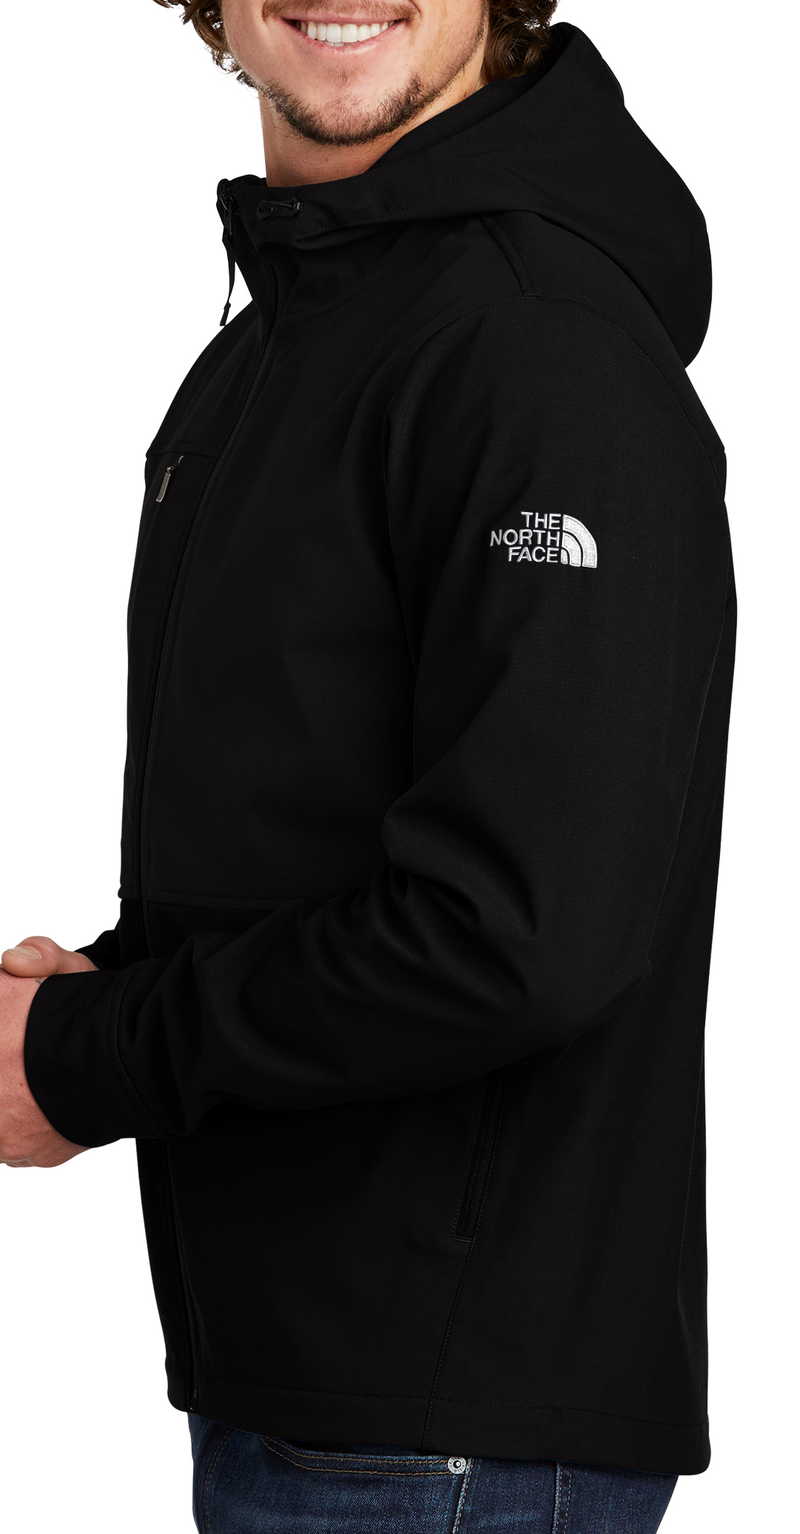 The North Face [NF0A529R] Castle Rock Hooded Soft Shell Jacket. Buy More and Save.